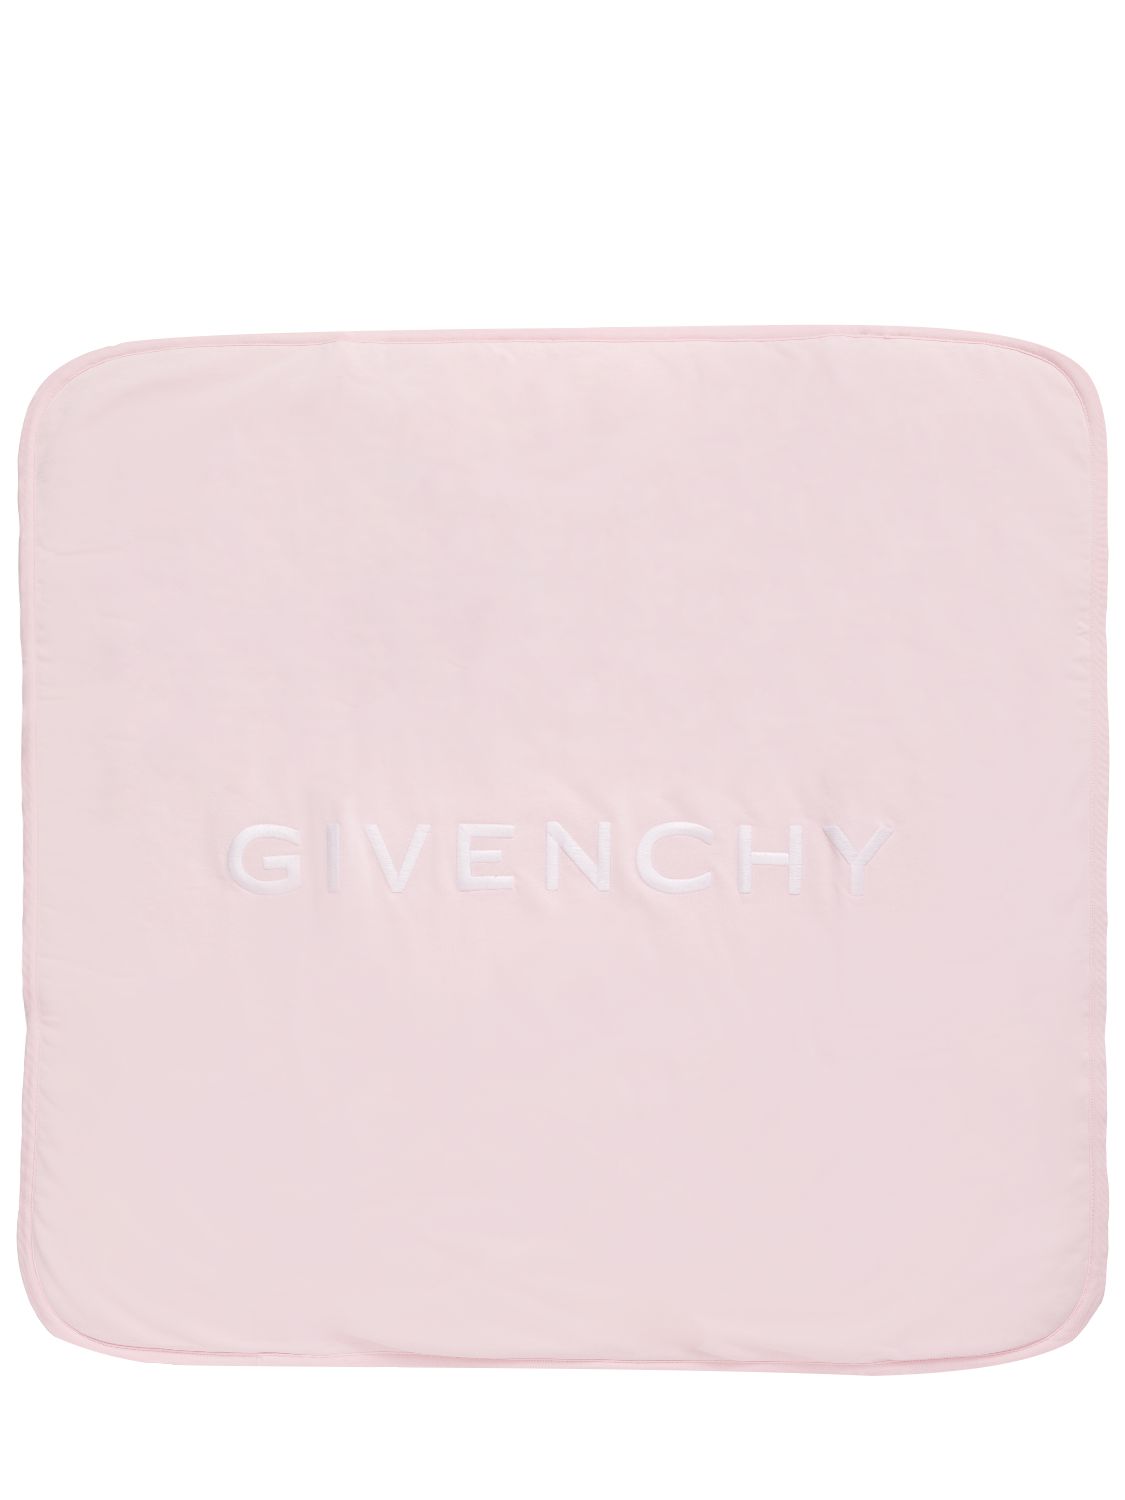 Givenchy Logo棉质平纹针织毯子 In Pink